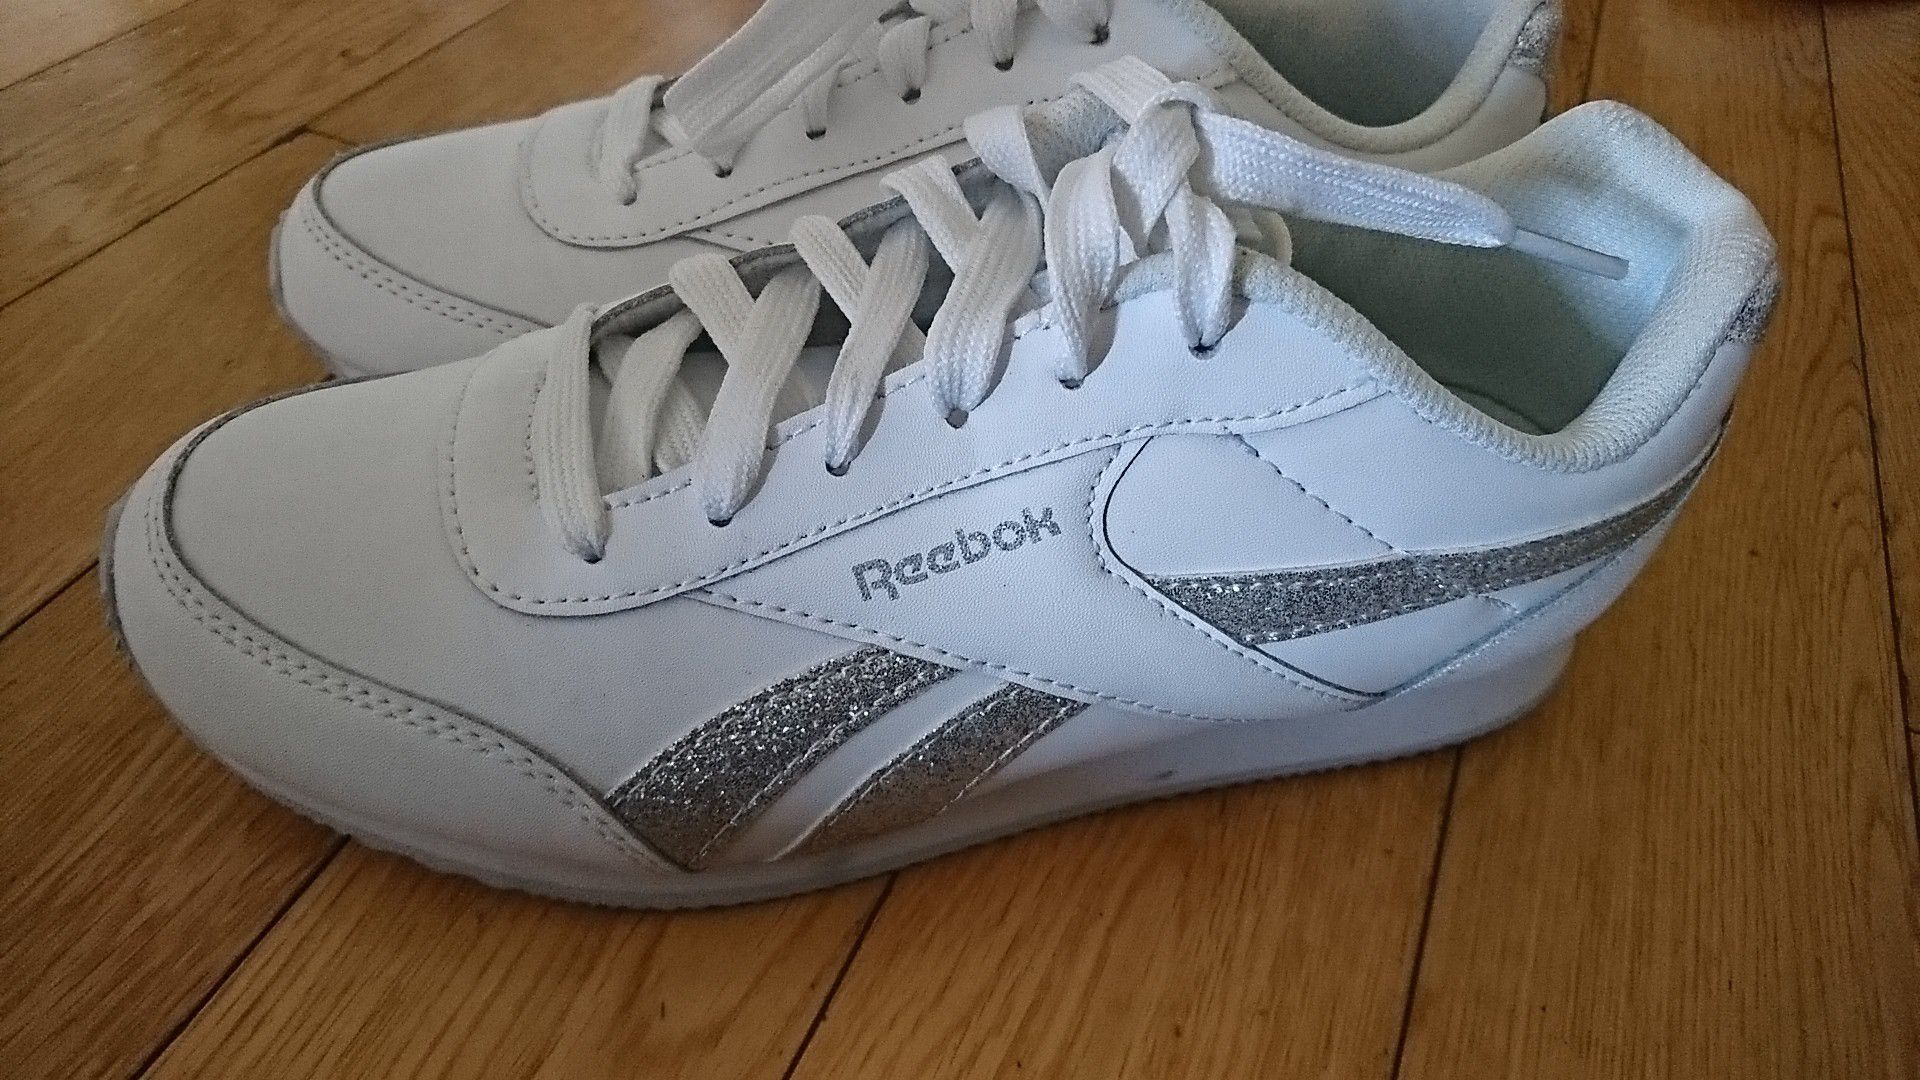 Reebok White sneakers for $30 never worn size 6.5